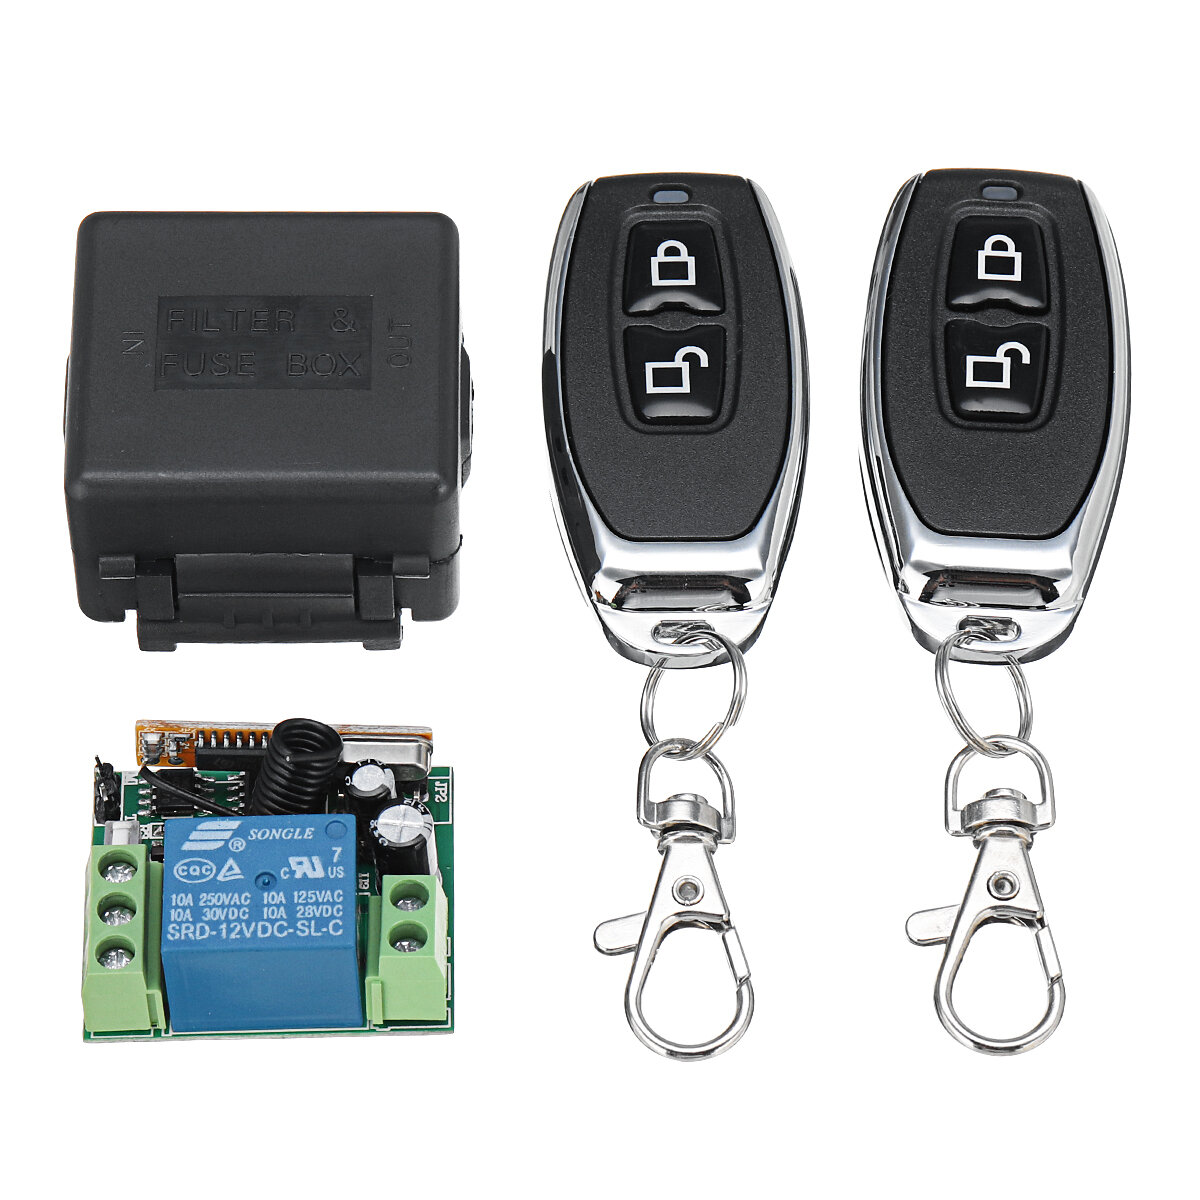 Details about   DC12V 1CH Relay Receiver RF Transmitter 433Mhz Wireless Remote Control Switch~~